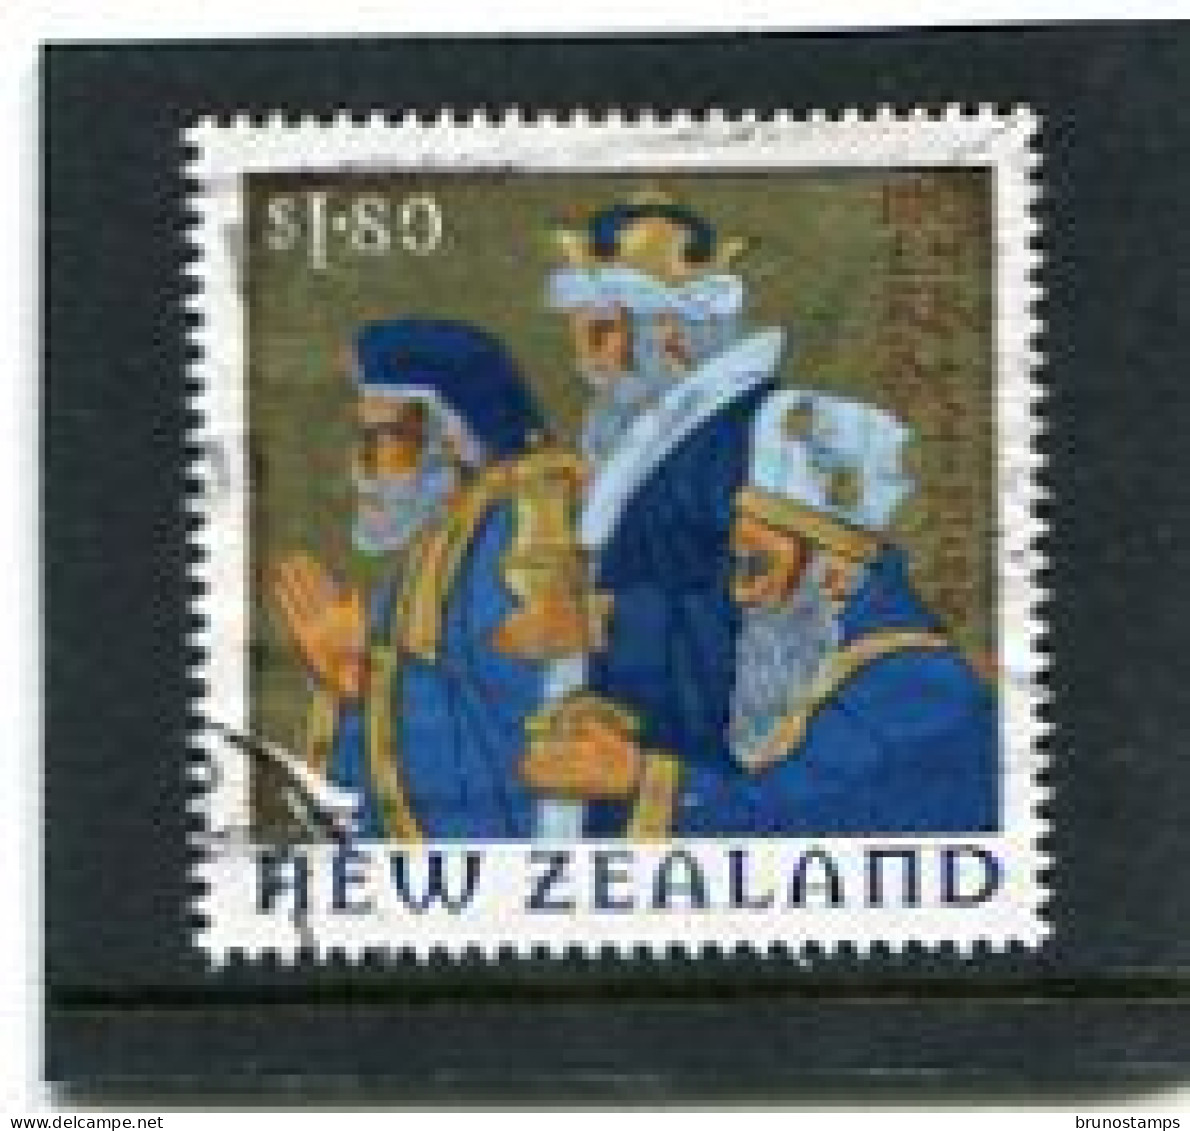 NEW ZEALAND - 2009  1.80$  CHRISTMAS   FINE  USED - Used Stamps